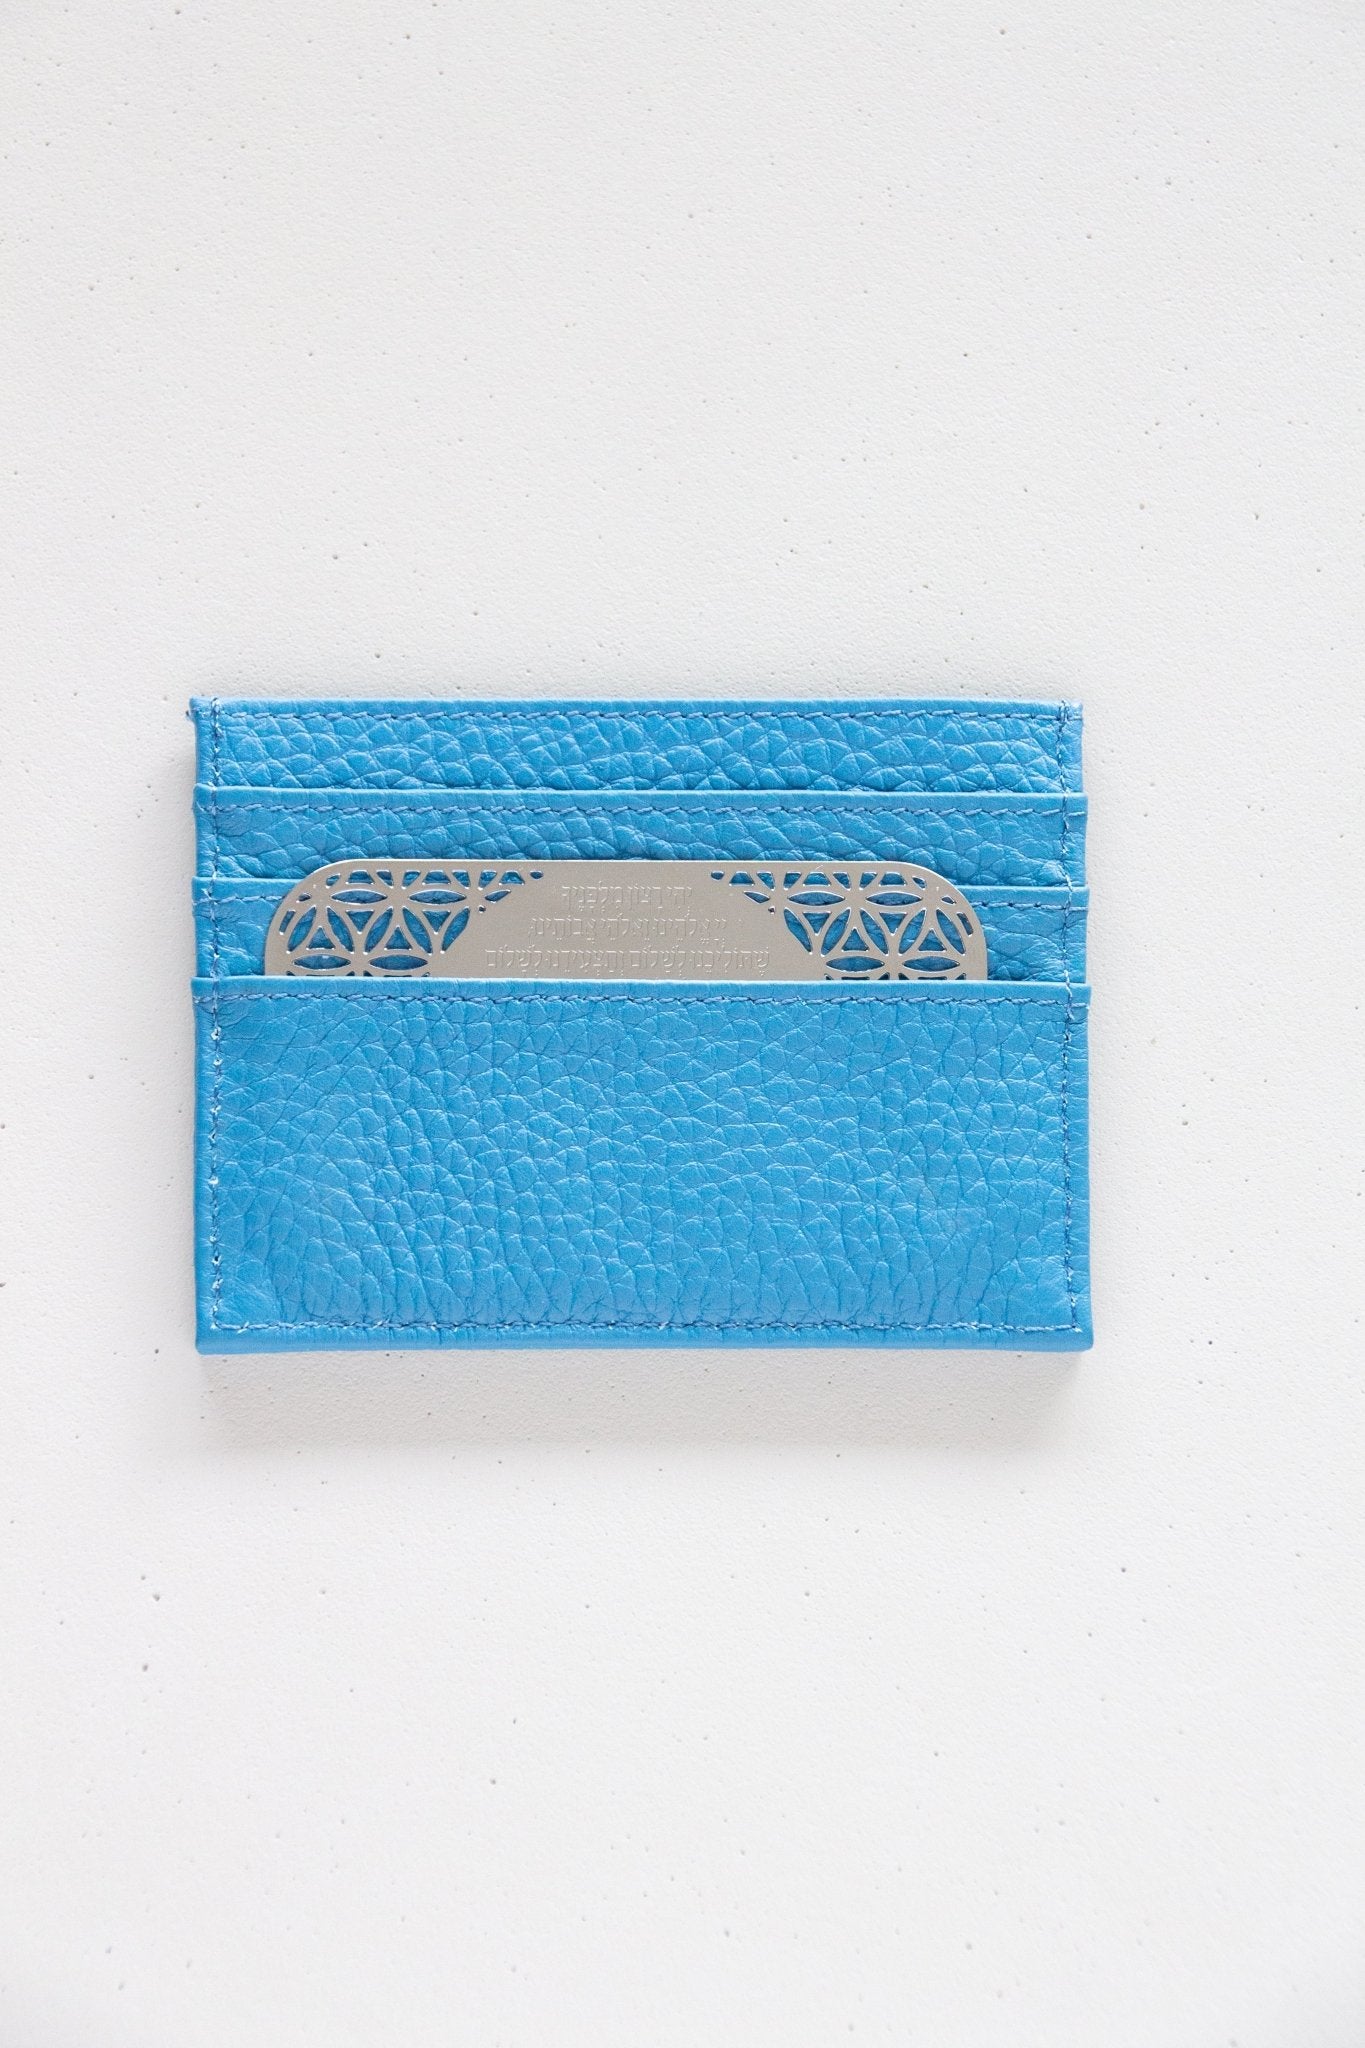 Tfilat Haderech metal card with lather wallet fussia - Stylish Luck Home Decor | Hamsa \ Hand Of Fatima | Good Luck Gifts